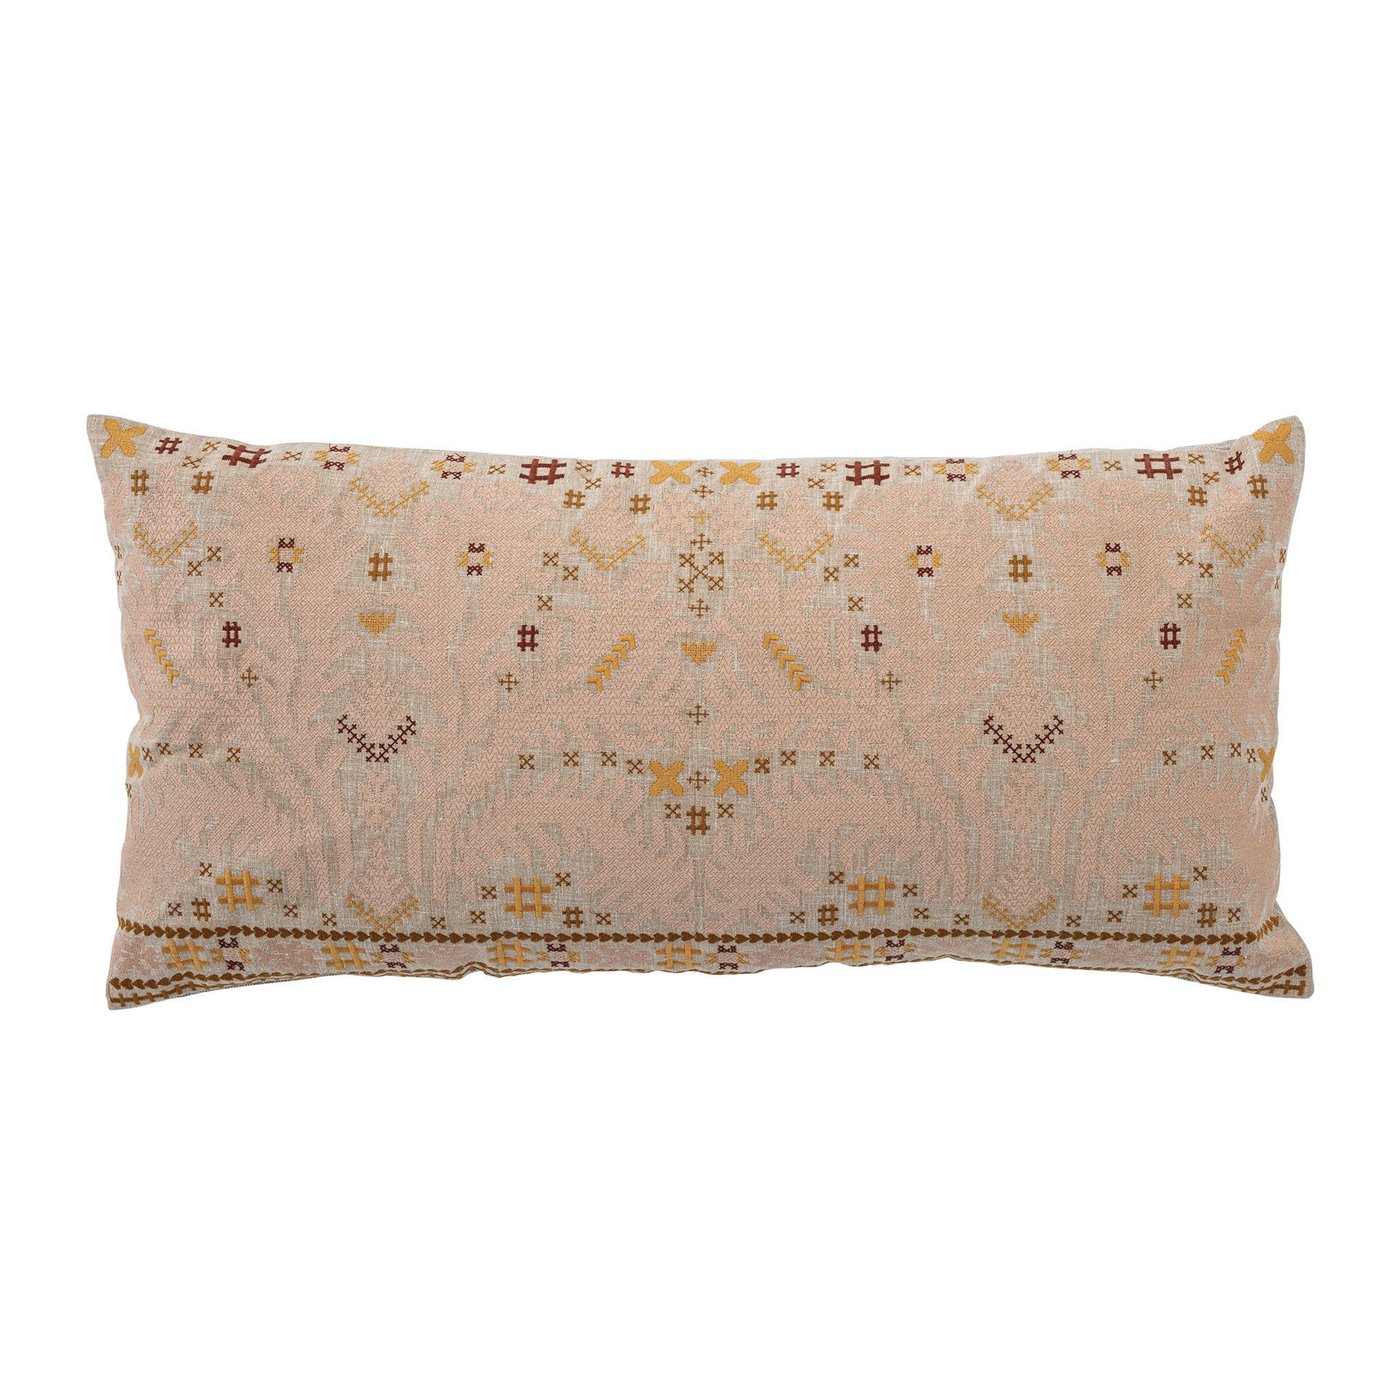 Lumbar Multi Color Embroidered Cotton Pillow